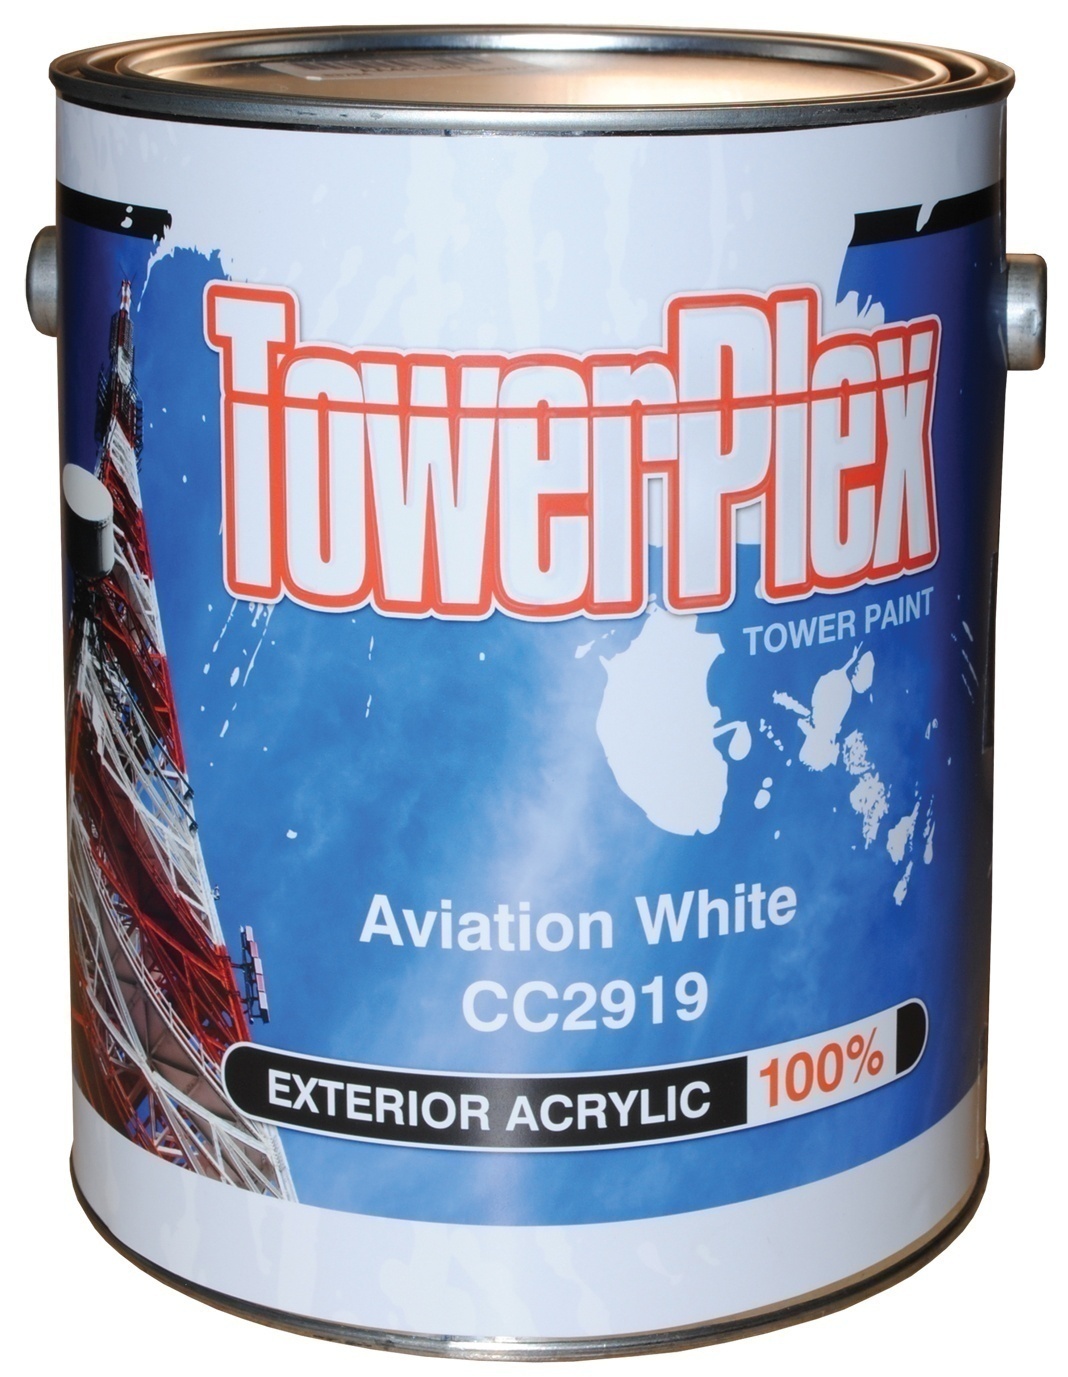 CC2919 TowerPlex Aviation White Tower Paint (5 Gallons) from Columbia Safety